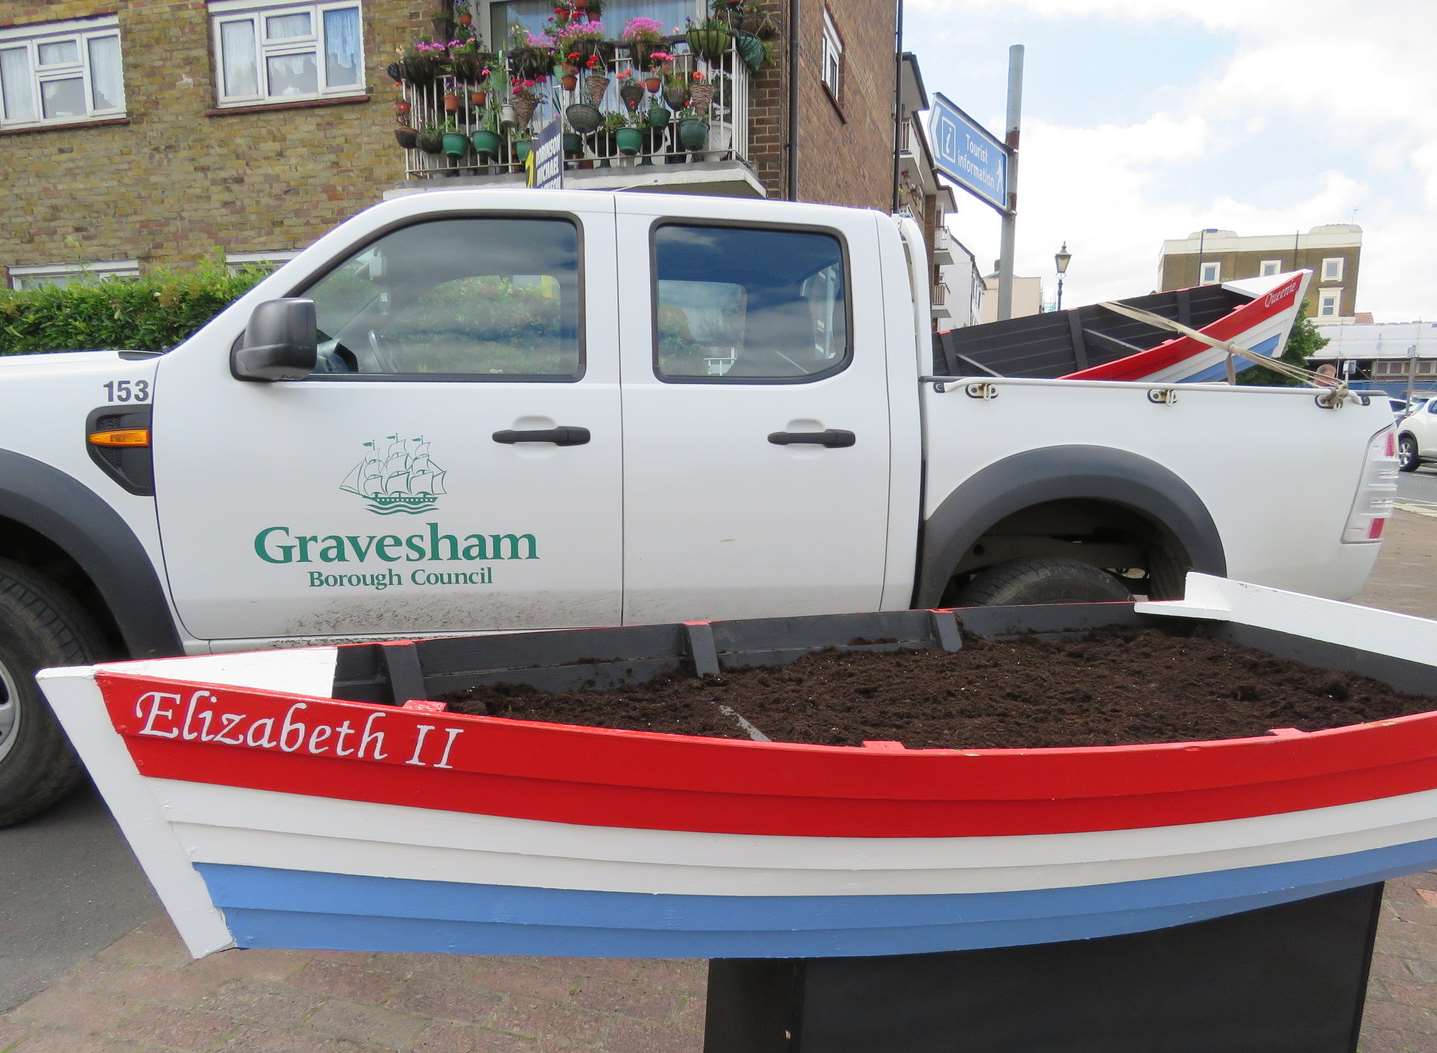 Flower- bed boats have been given a makeover too.